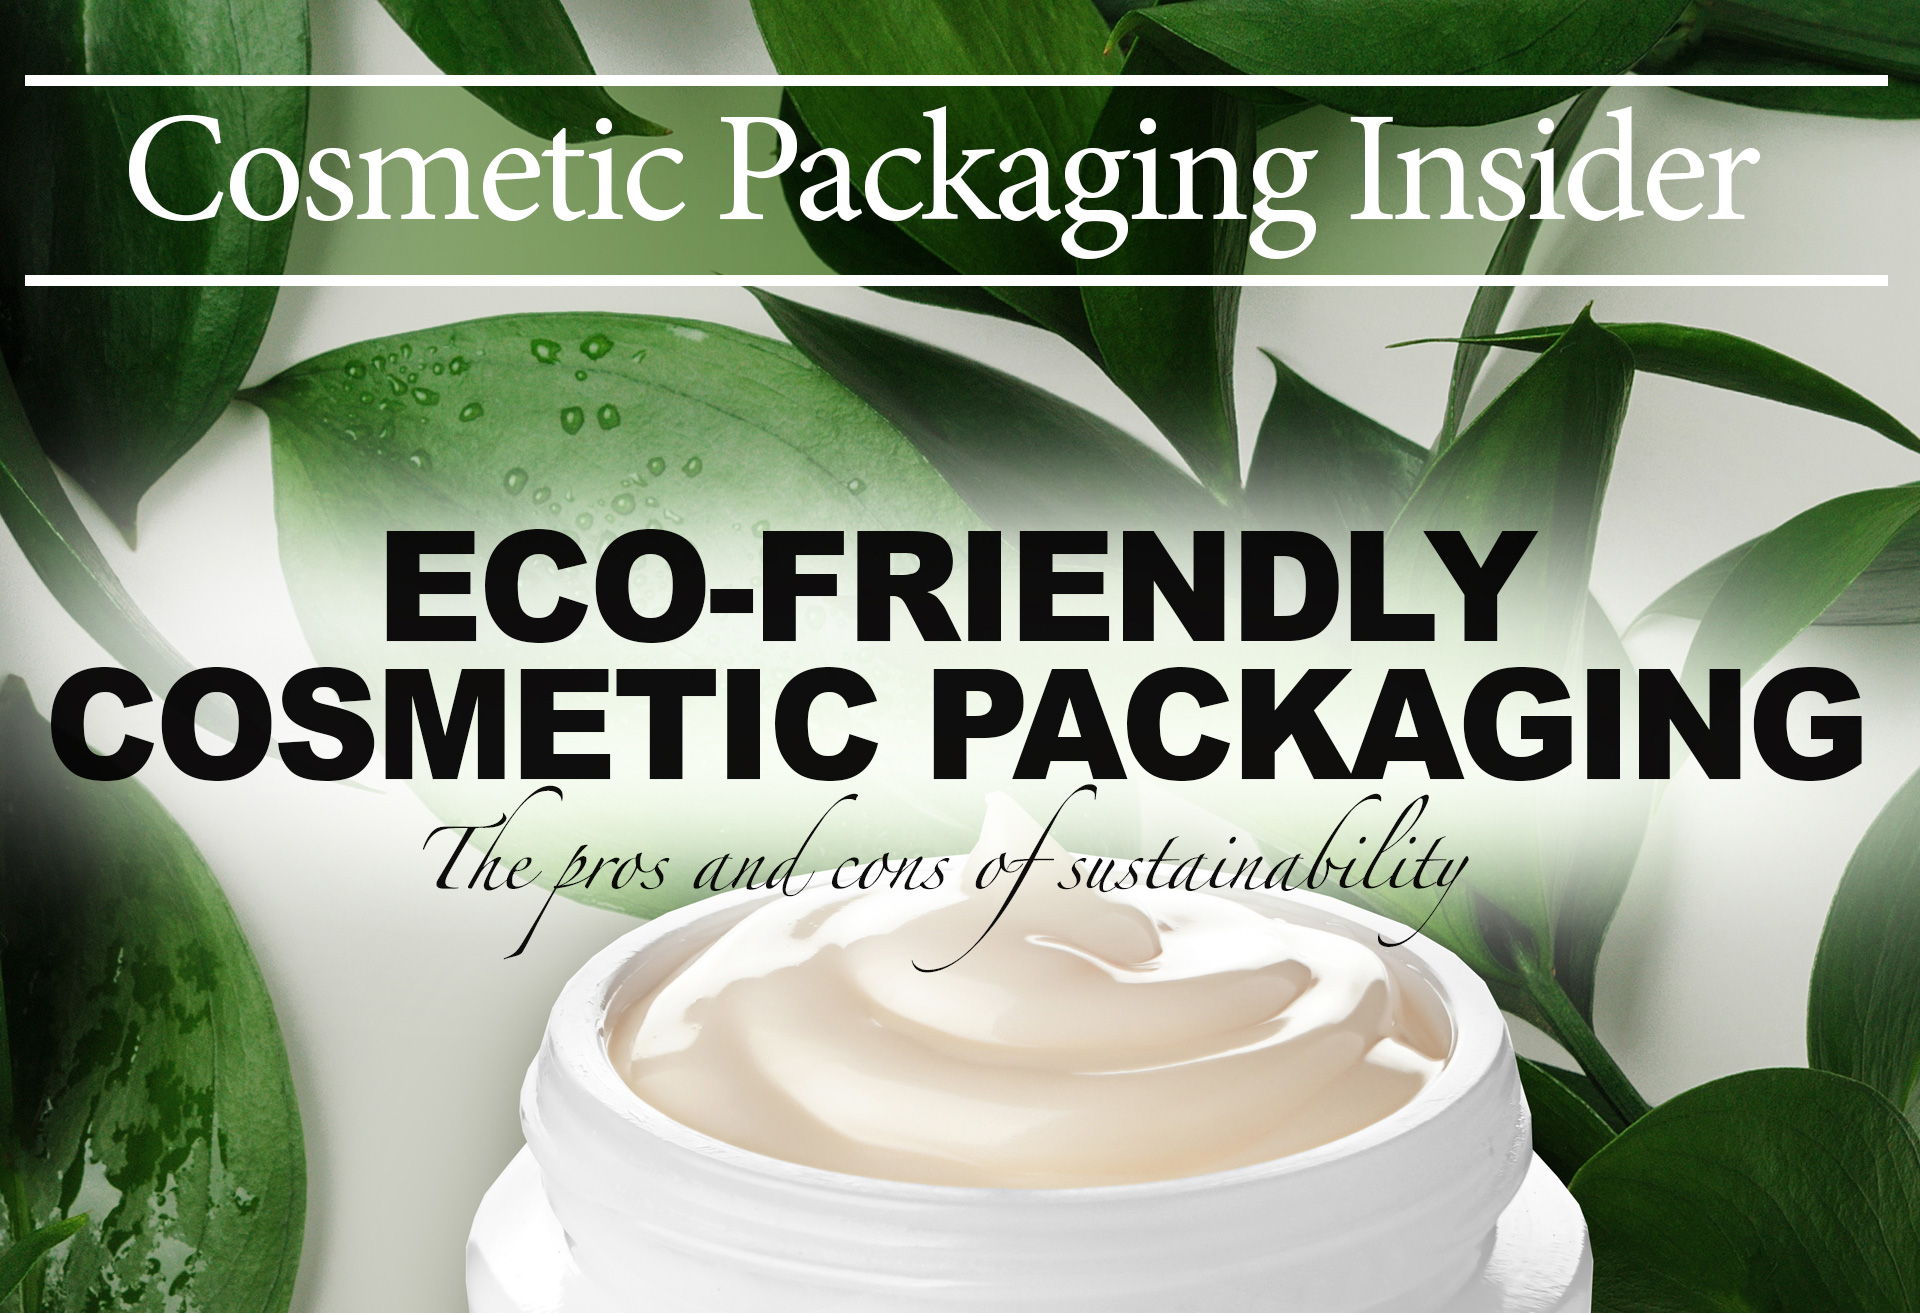 Eco-Friendly Cosmetic Packaging - The Pros and Cons of Sustainability